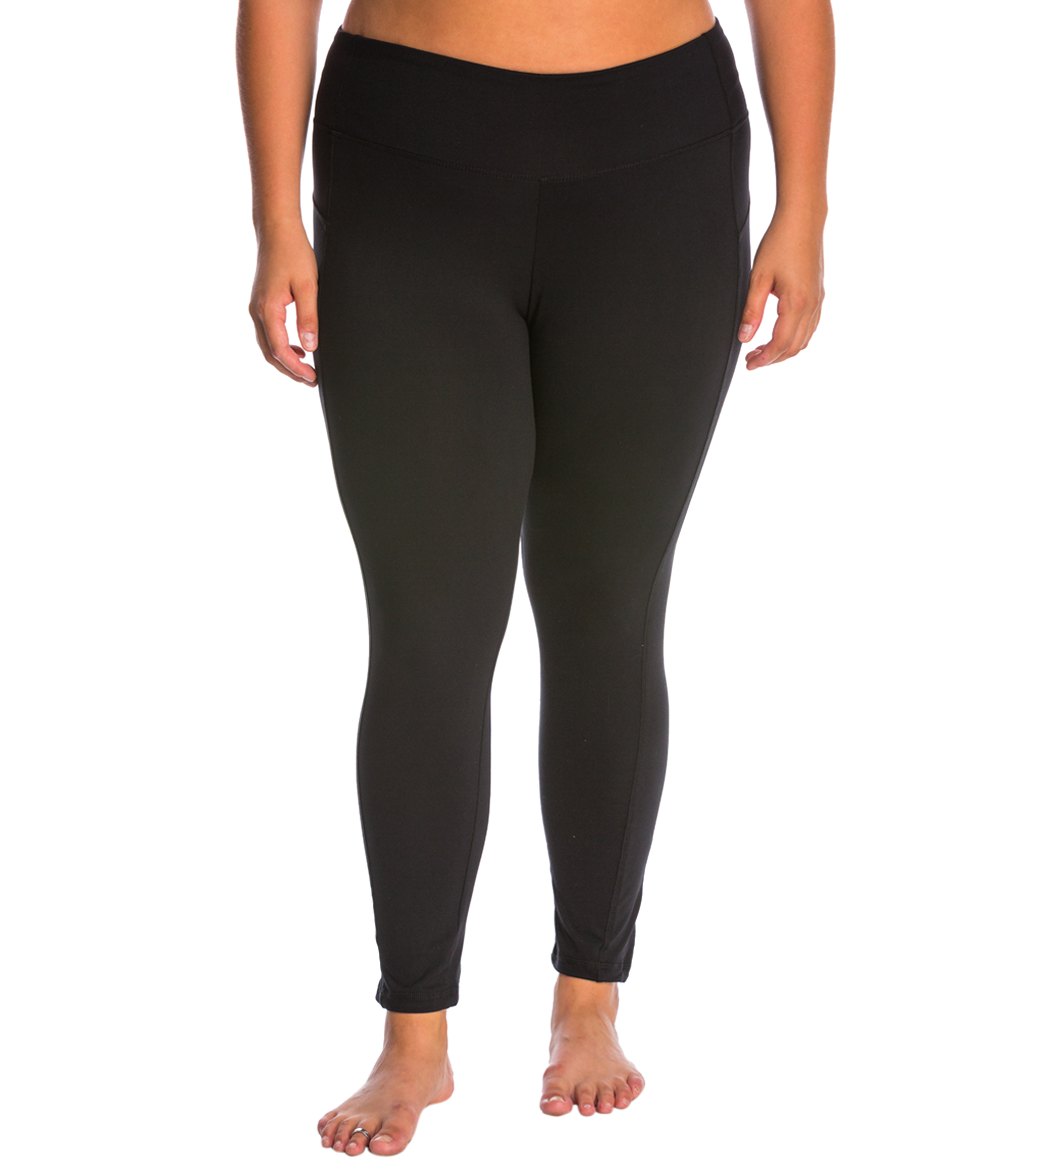 THE BALANCE COLLECTION Womens Size Small Fits XS Compression Yoga Pants  Leggings | eBay